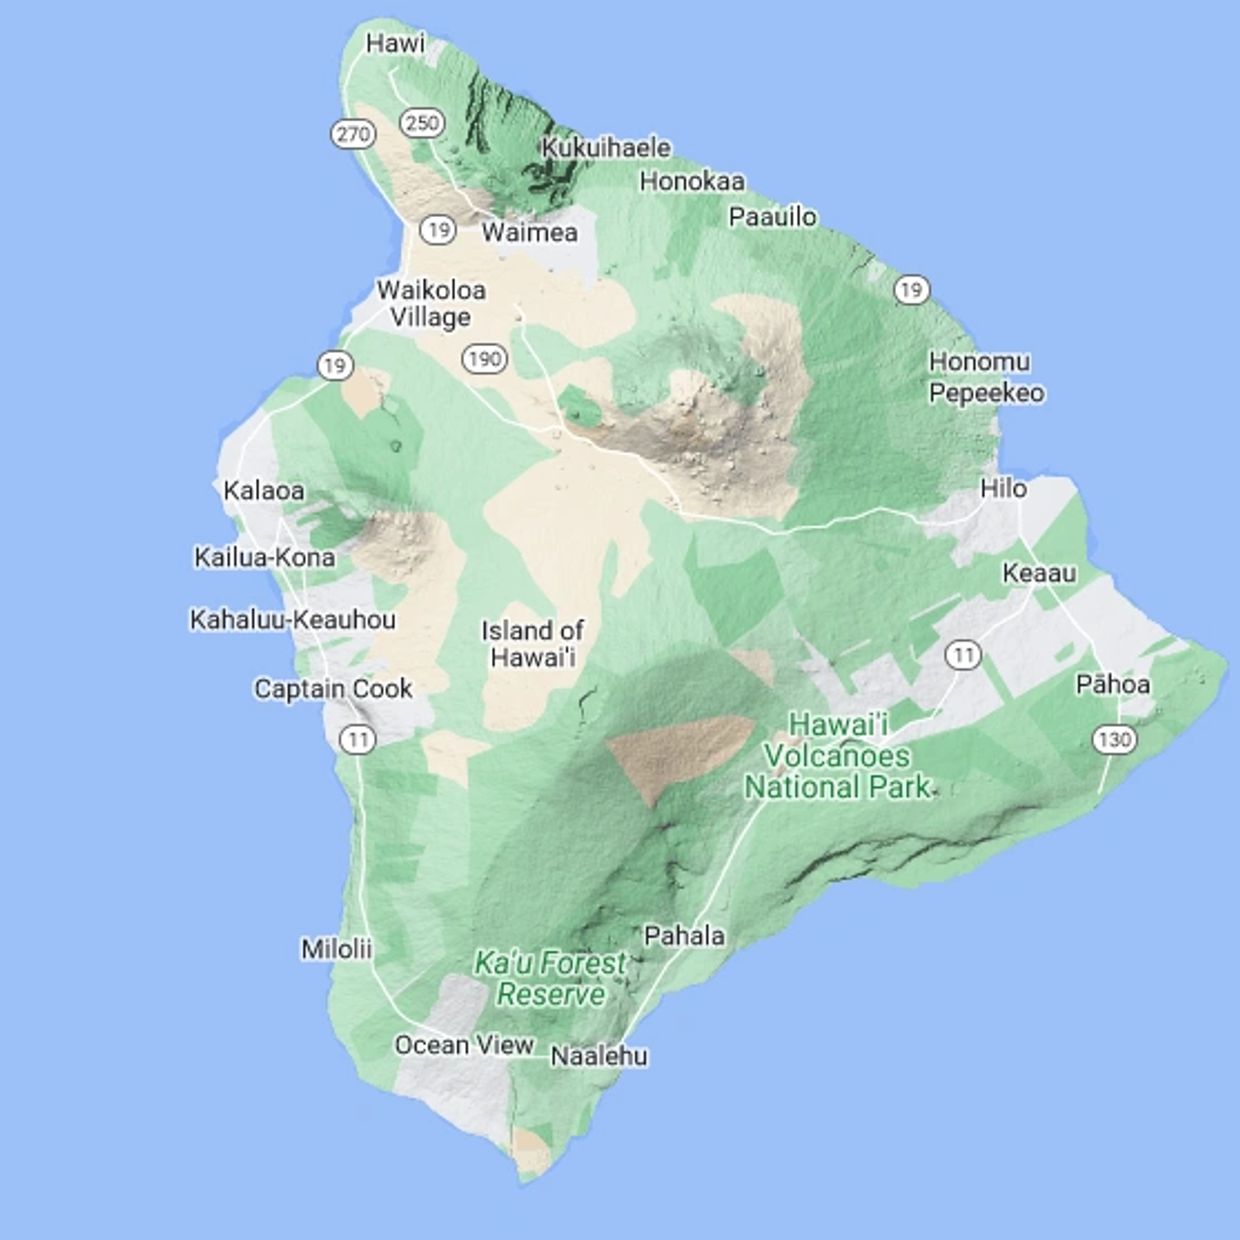 About the Island of Hawaiʻi